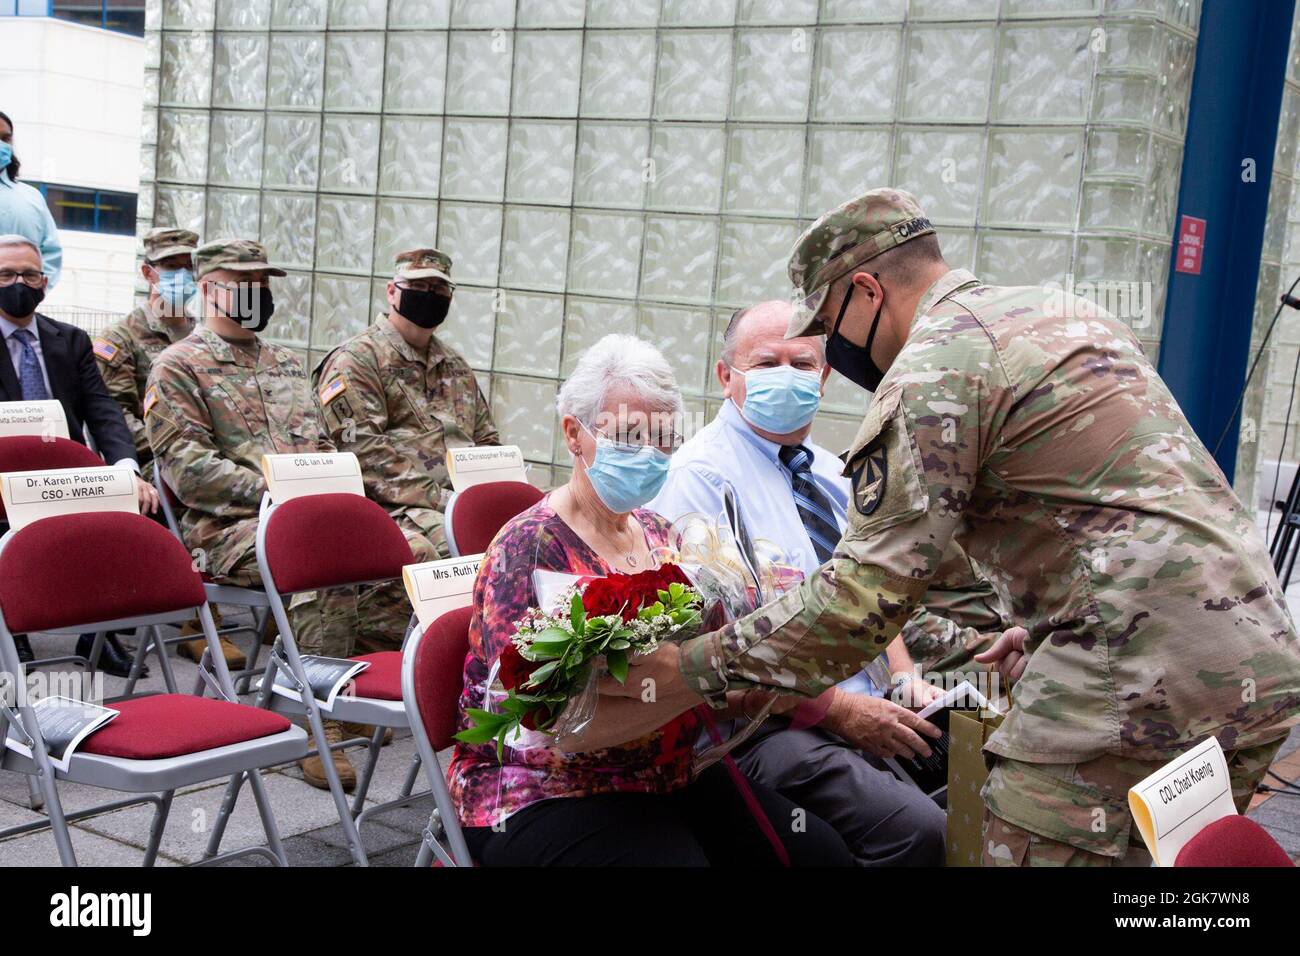 Sgt. Dalton Carrington presents flowers to Ruth Koenig during an assumption of command ceremony, August 31, 2021, Silver Spring, Md. Col. Chad Koenig assumed command of the Walter Reed Army Institute of Research during the ceremony and thanked his parents for years of support. Stock Photo